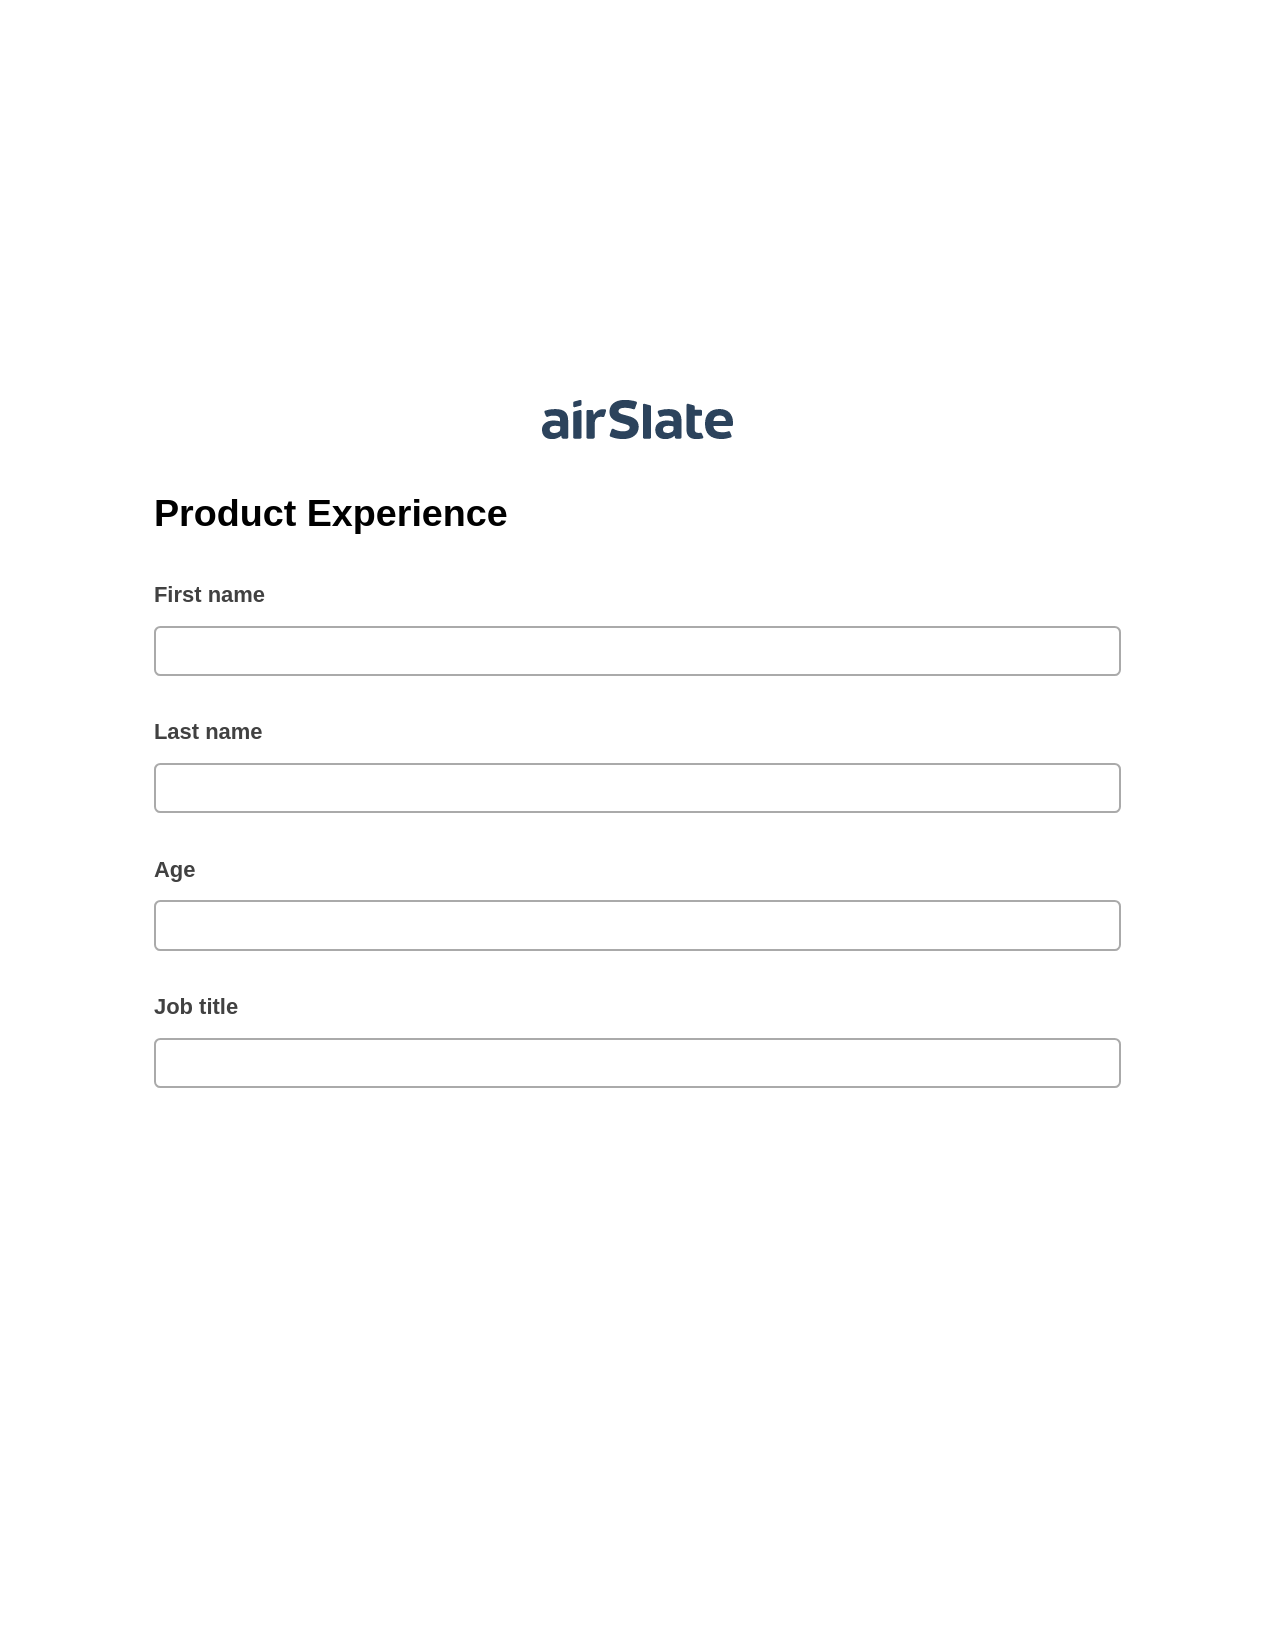 Multirole Product Experience Pre-fill from MS Dynamics 365 Records, Jira Bot, Post-finish Document Bot